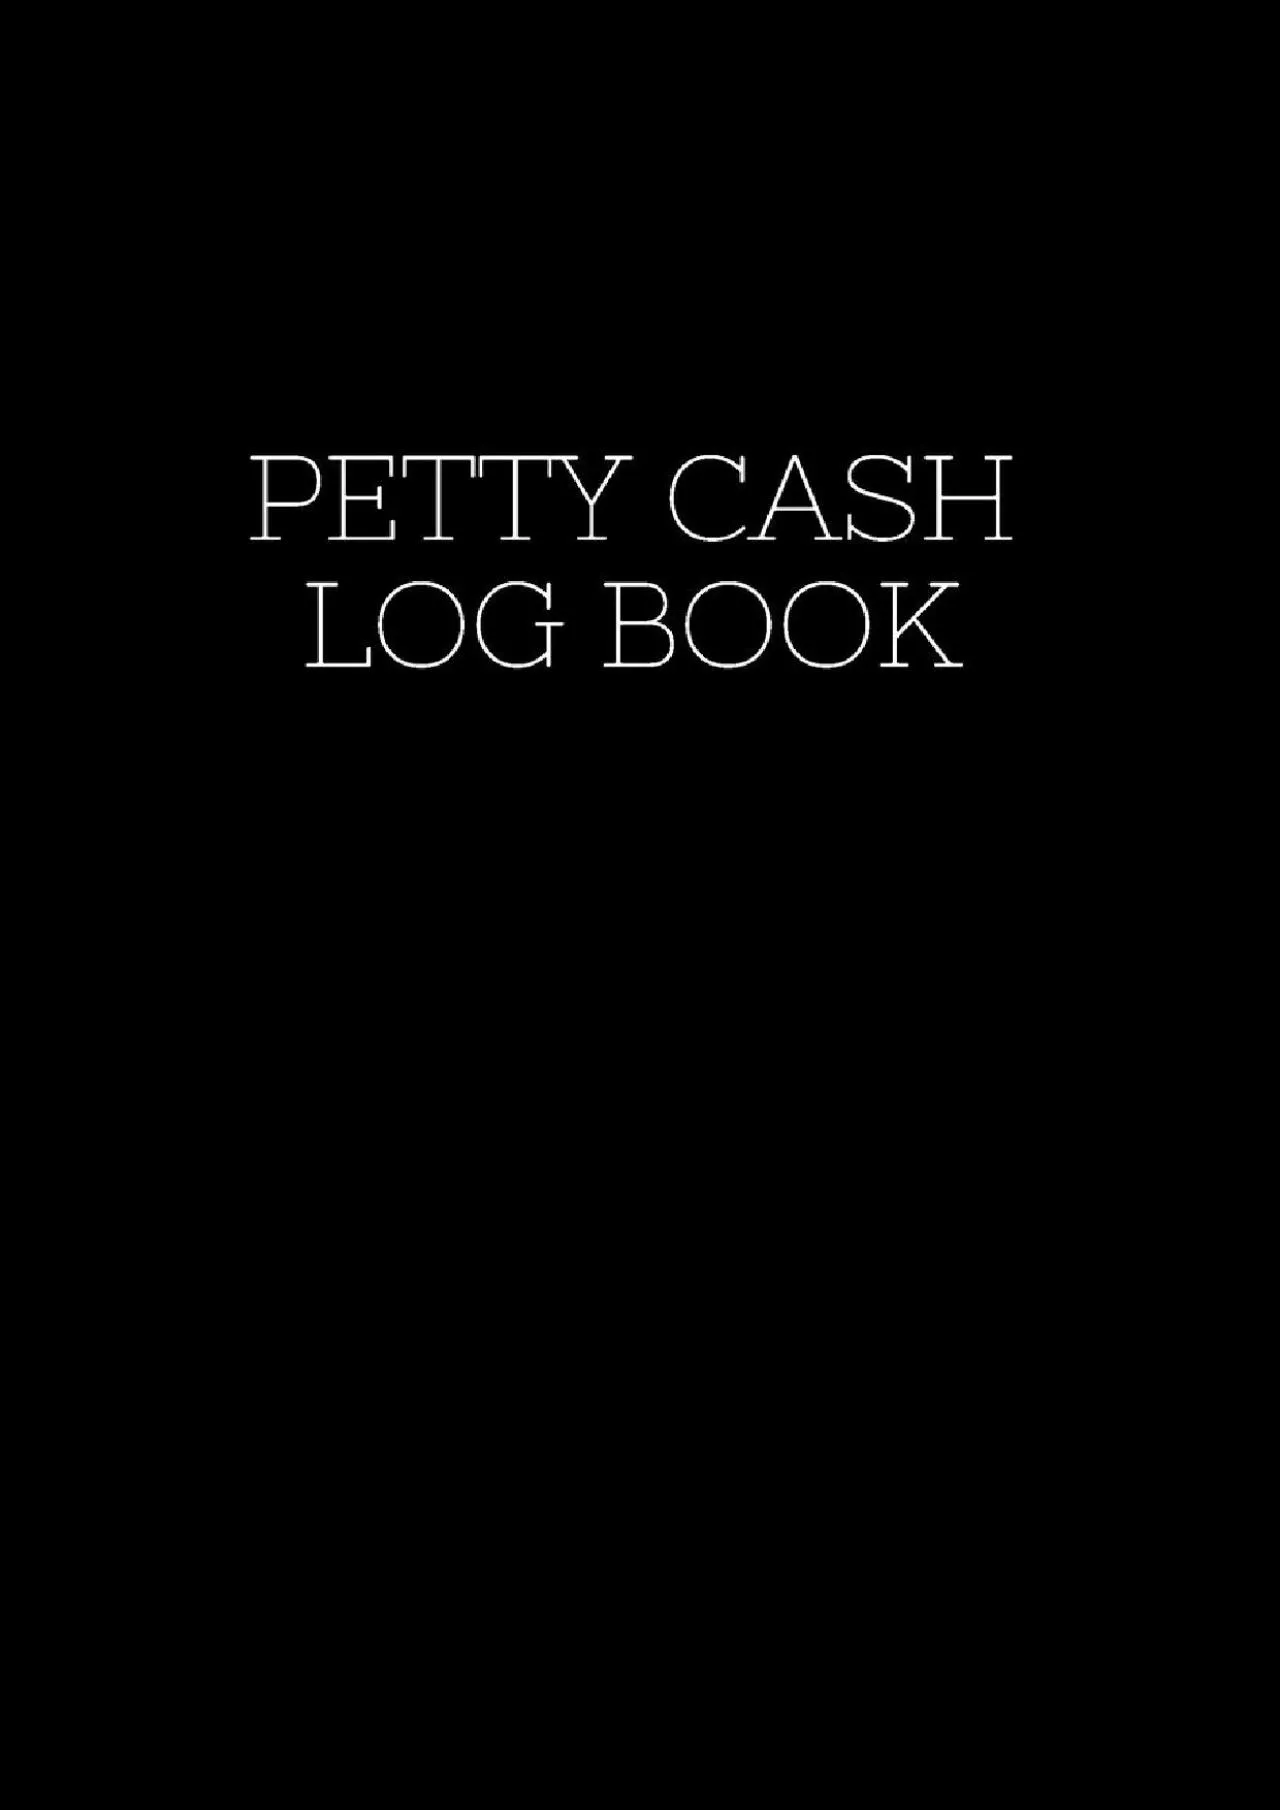 (DOWNLOAD)-Petty Cash Log Book: A Small Ledger For Tracking Cash Box Funds (Black, White)